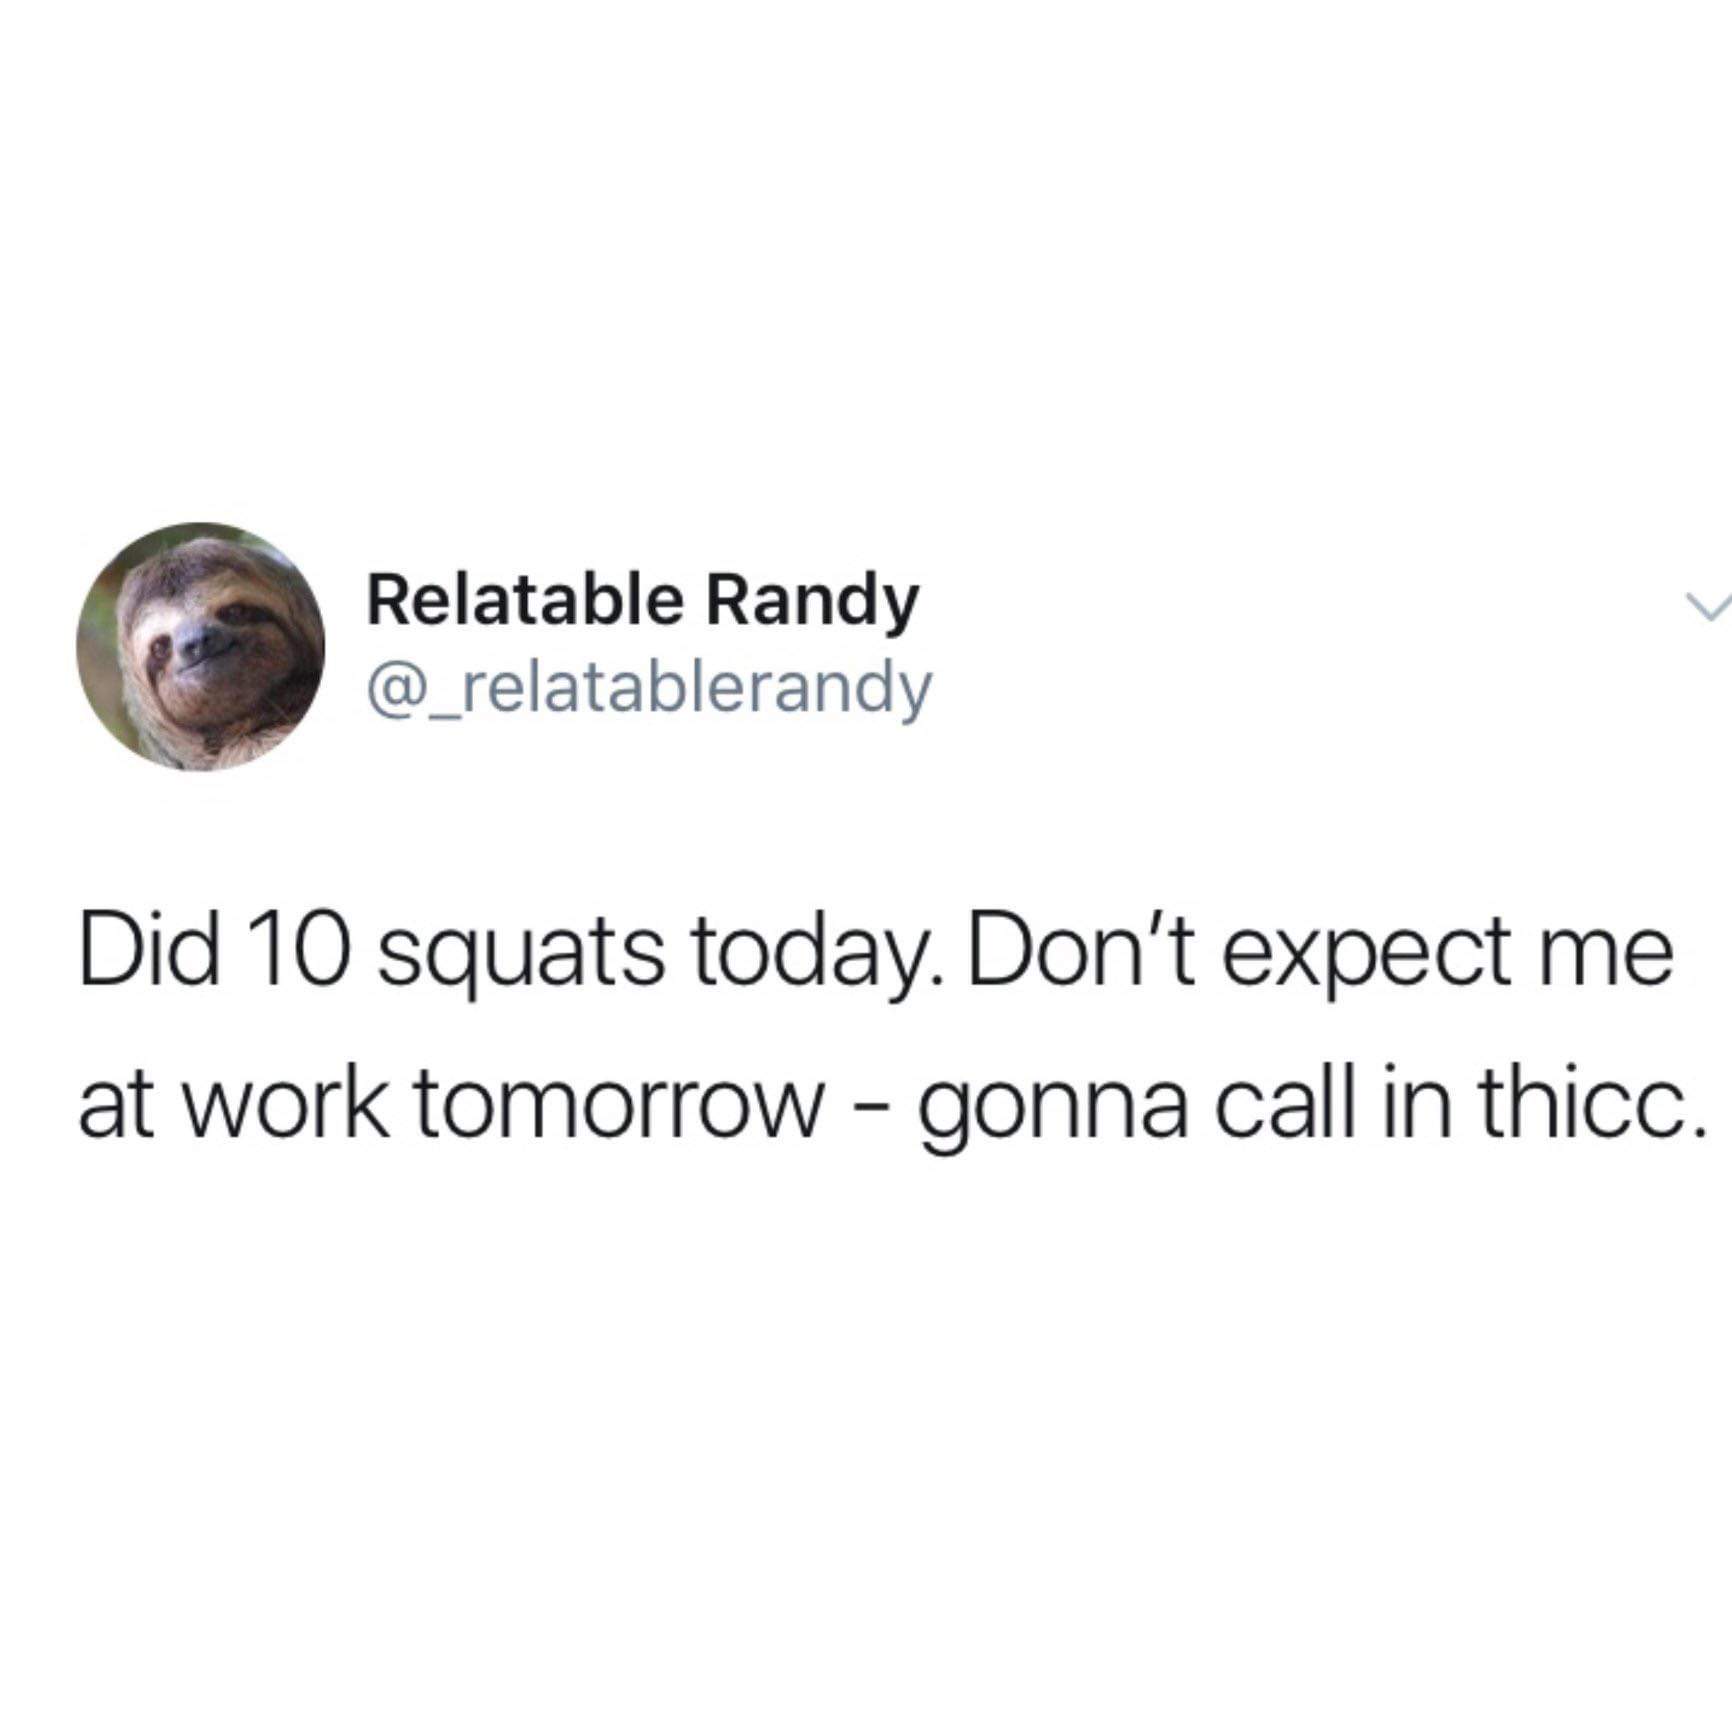 Relatable Randy Did 10 squats today. Don't expect me at work tomorrow gonna call in thicc.